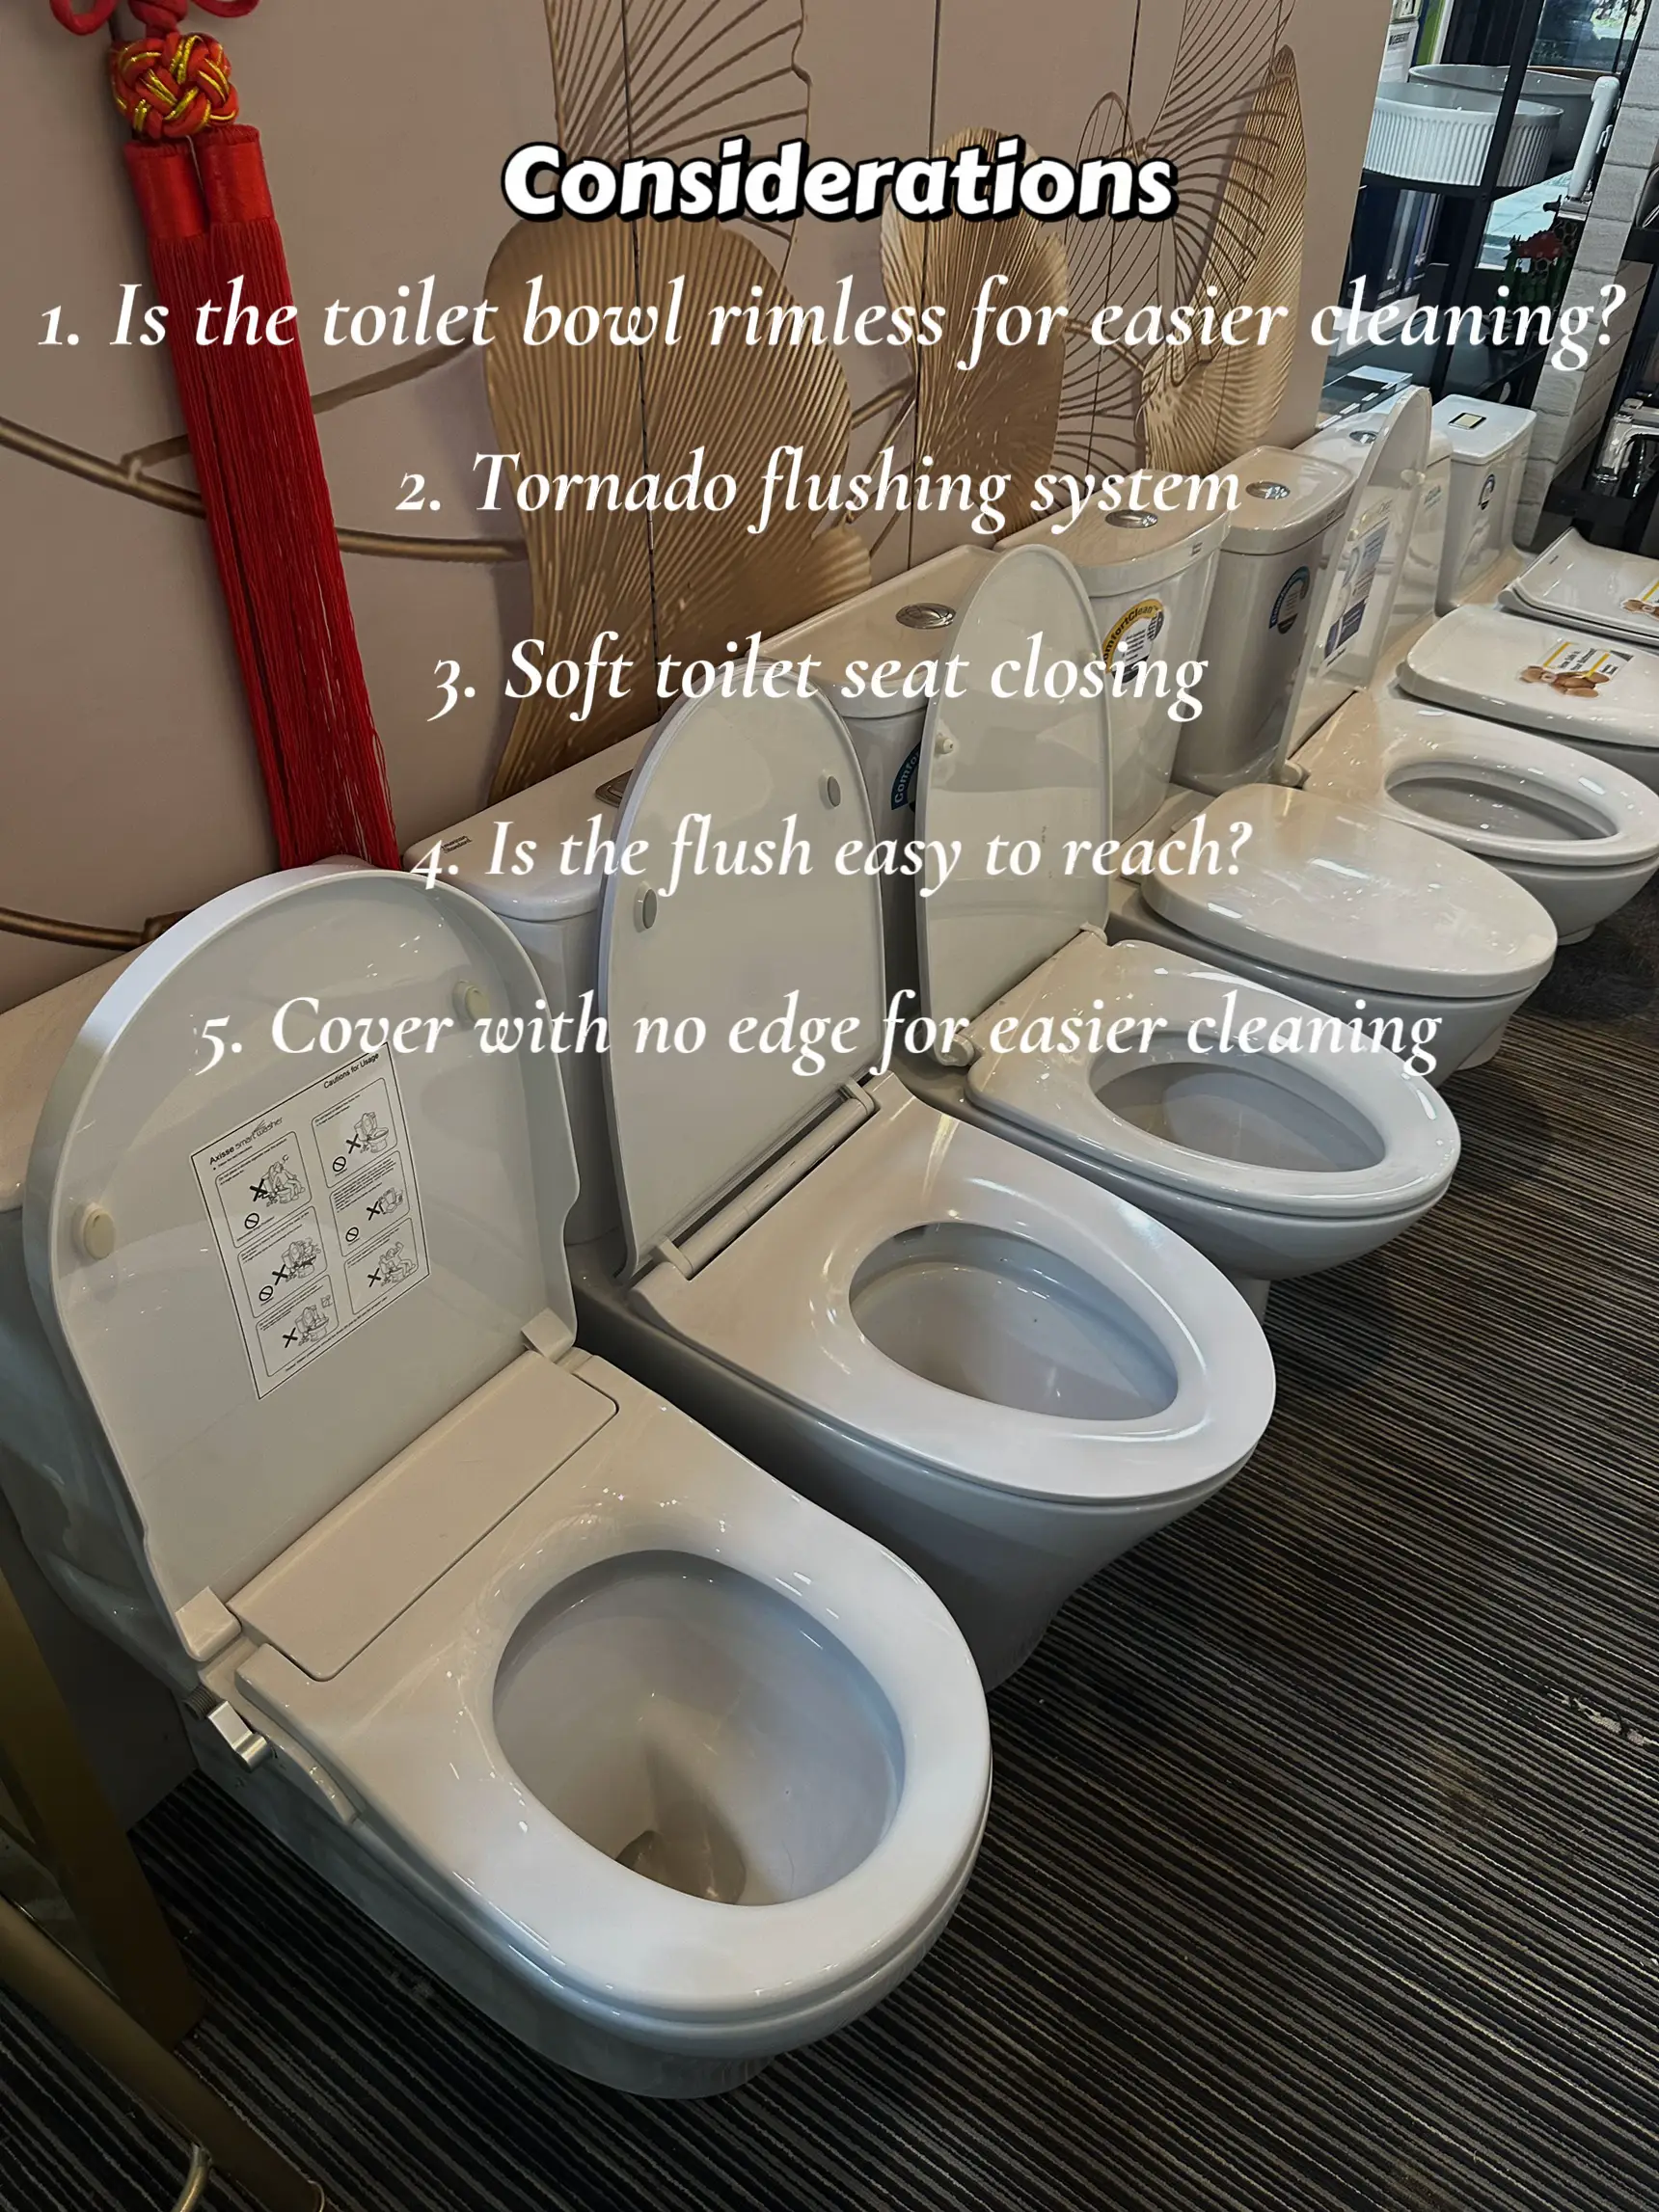 how often to change sanitary products - Lemon8 Search